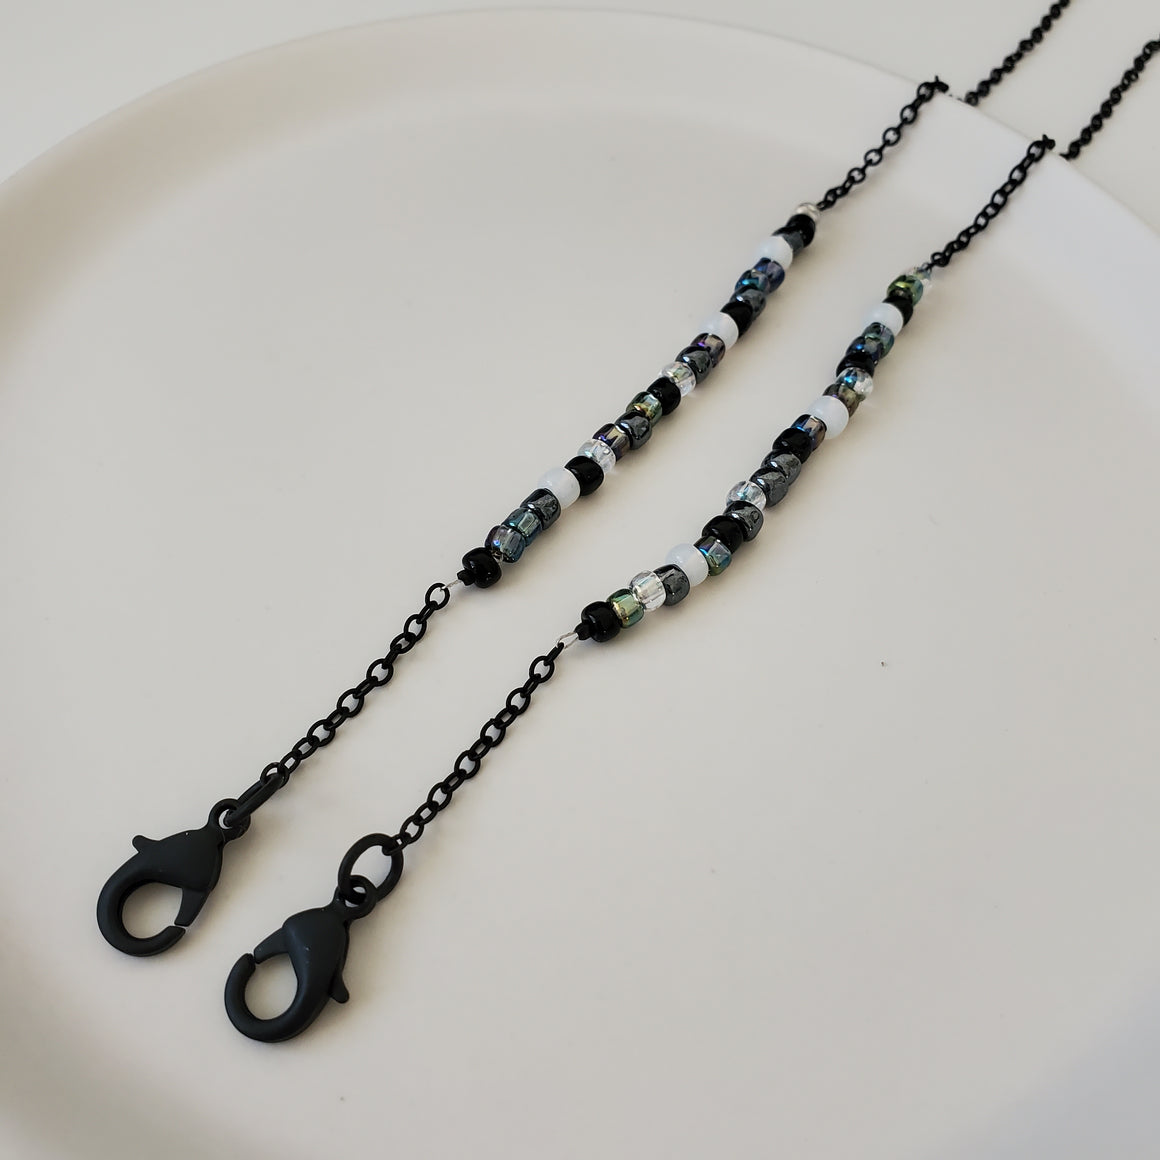 Mask Chain - Matte Black with glass beads